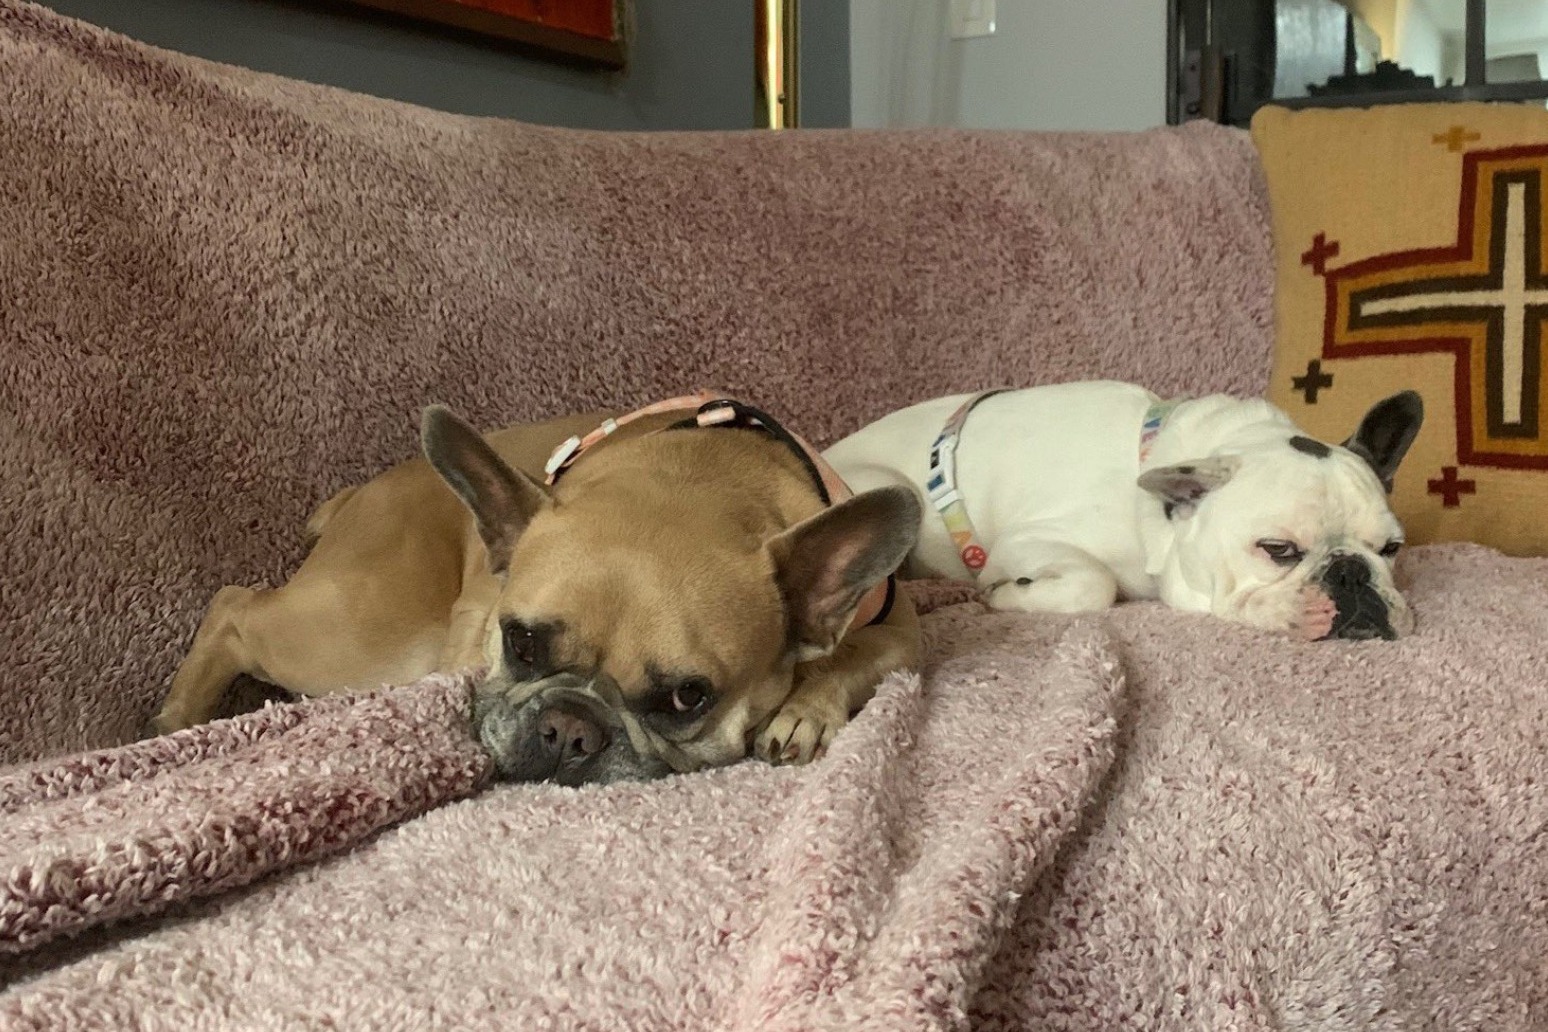 Lady Gaga’s dogs found safe and well after being stolen at gunpoint 